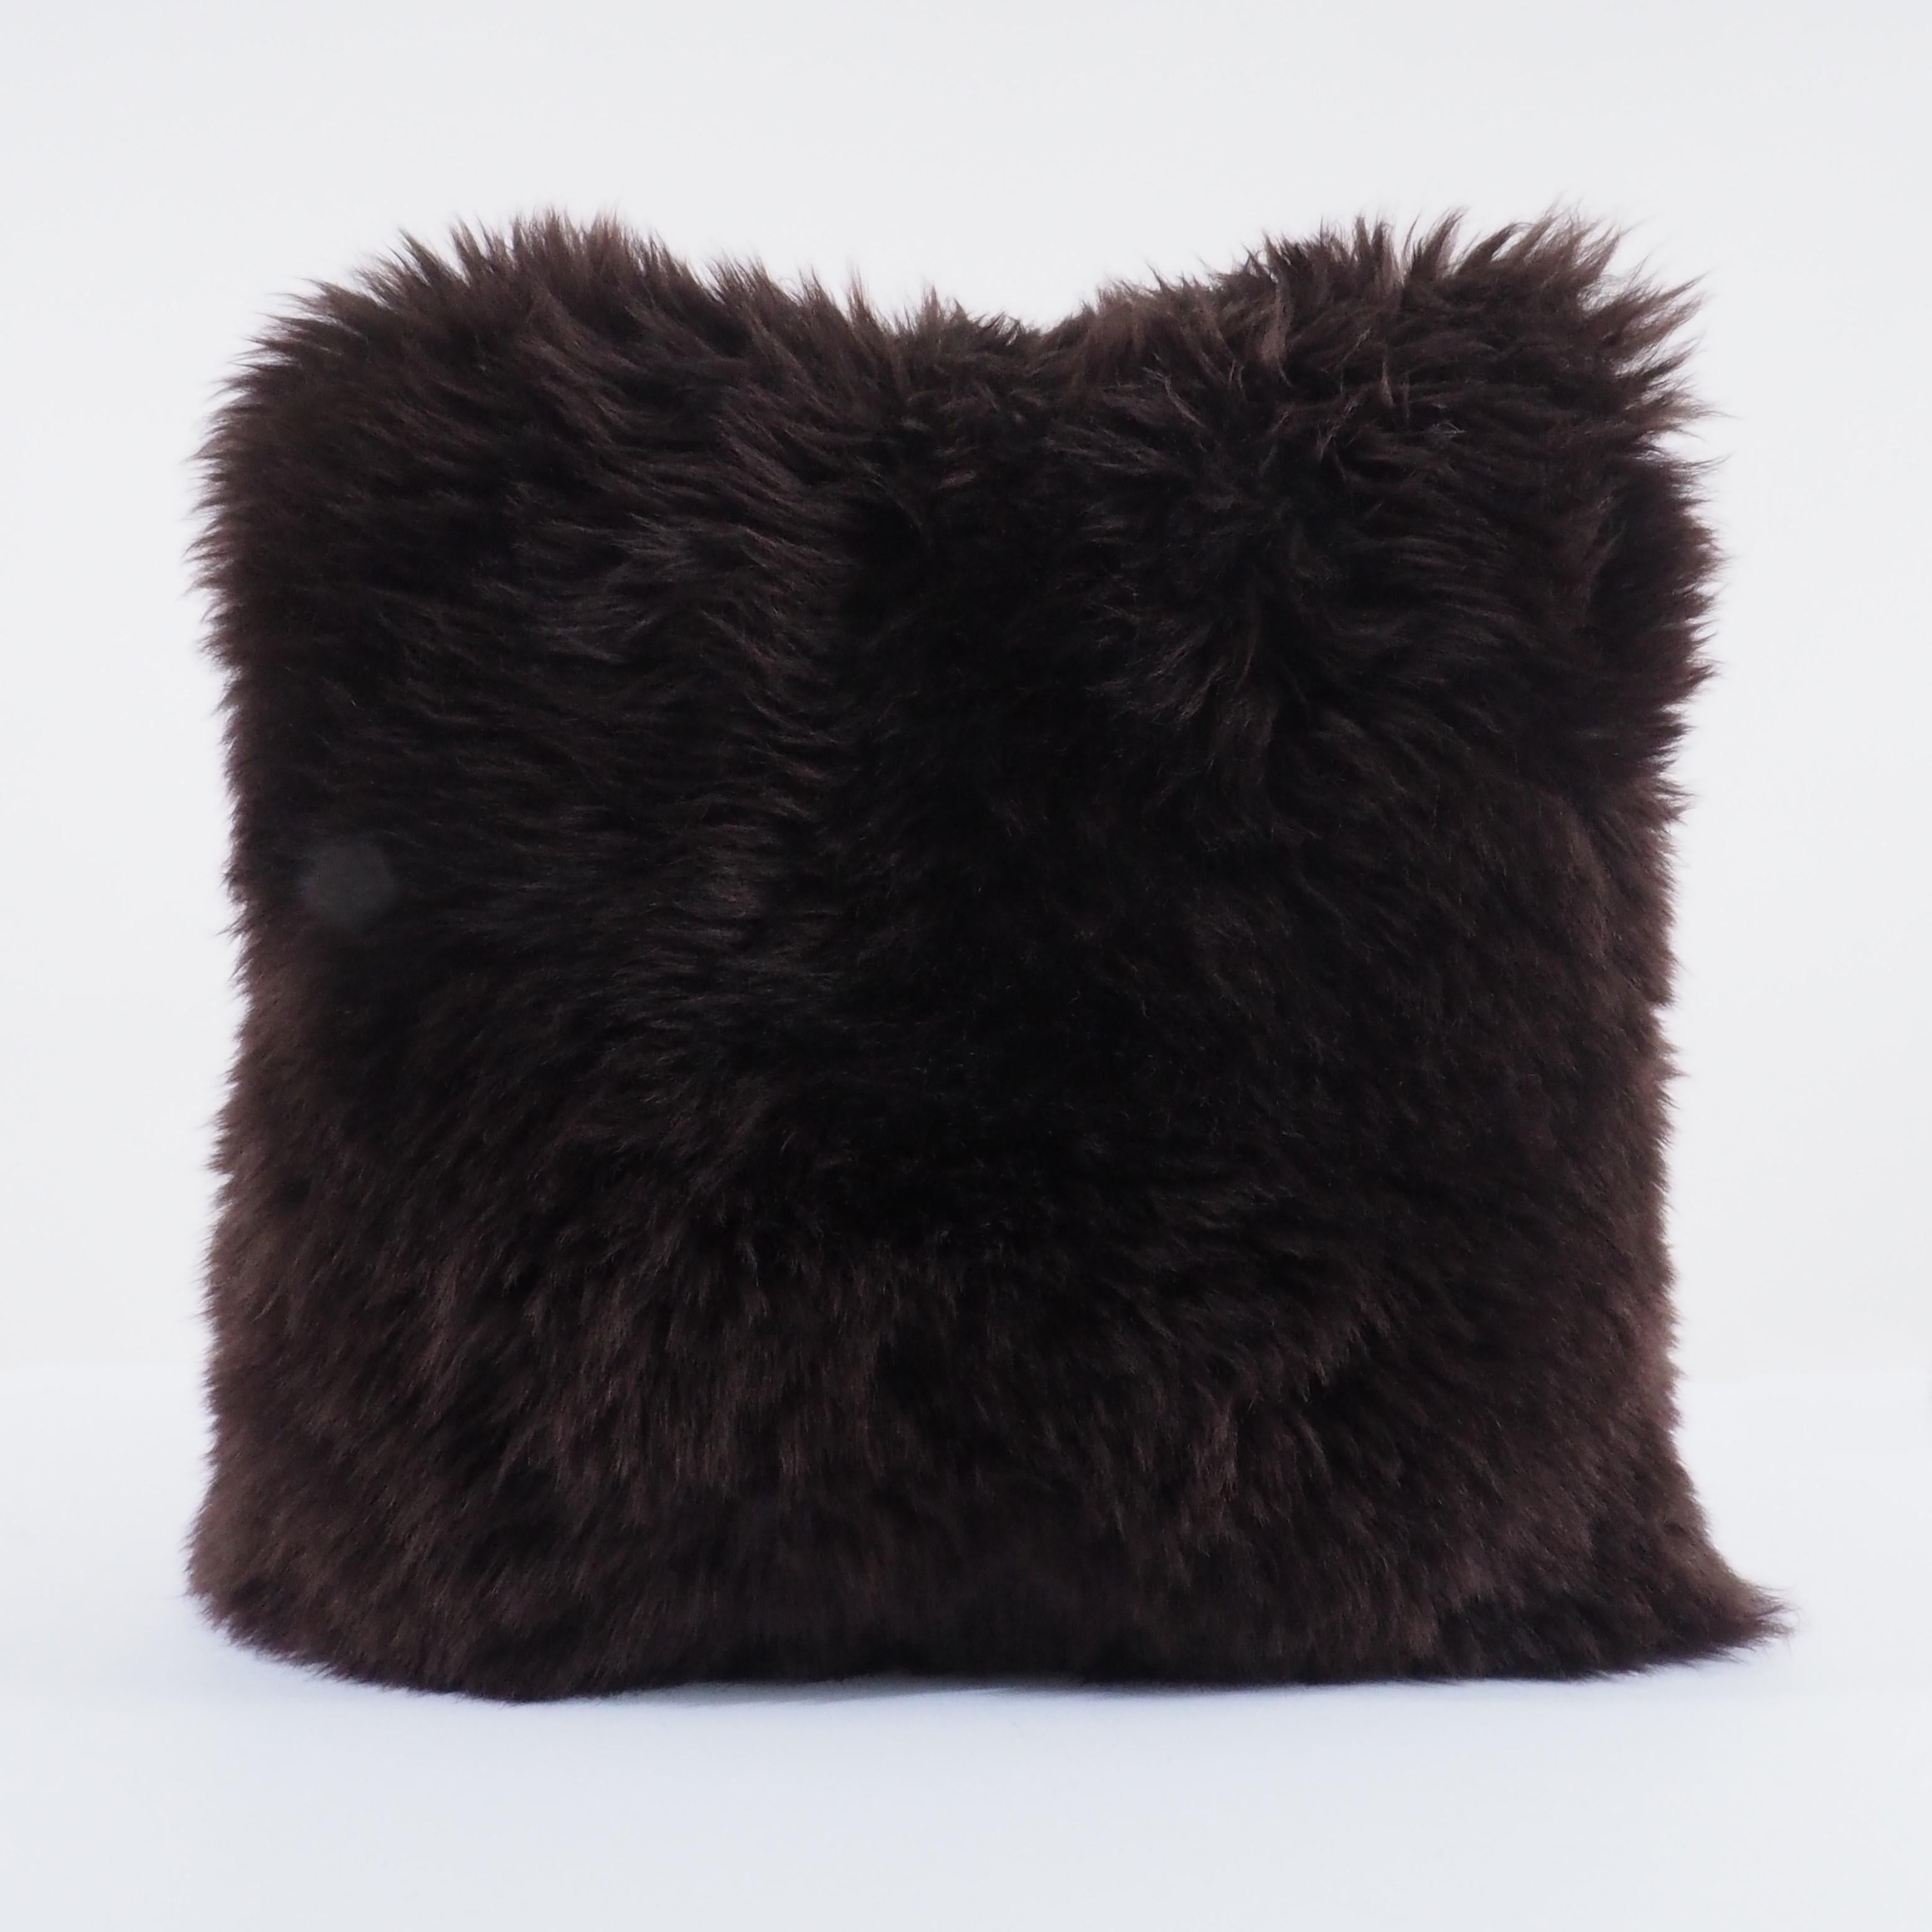 Dark Chocolate Brown Shearling Sheepskin Pillow Fluffy Cushion by Muchi Decor In New Condition For Sale In Poviglio, IT